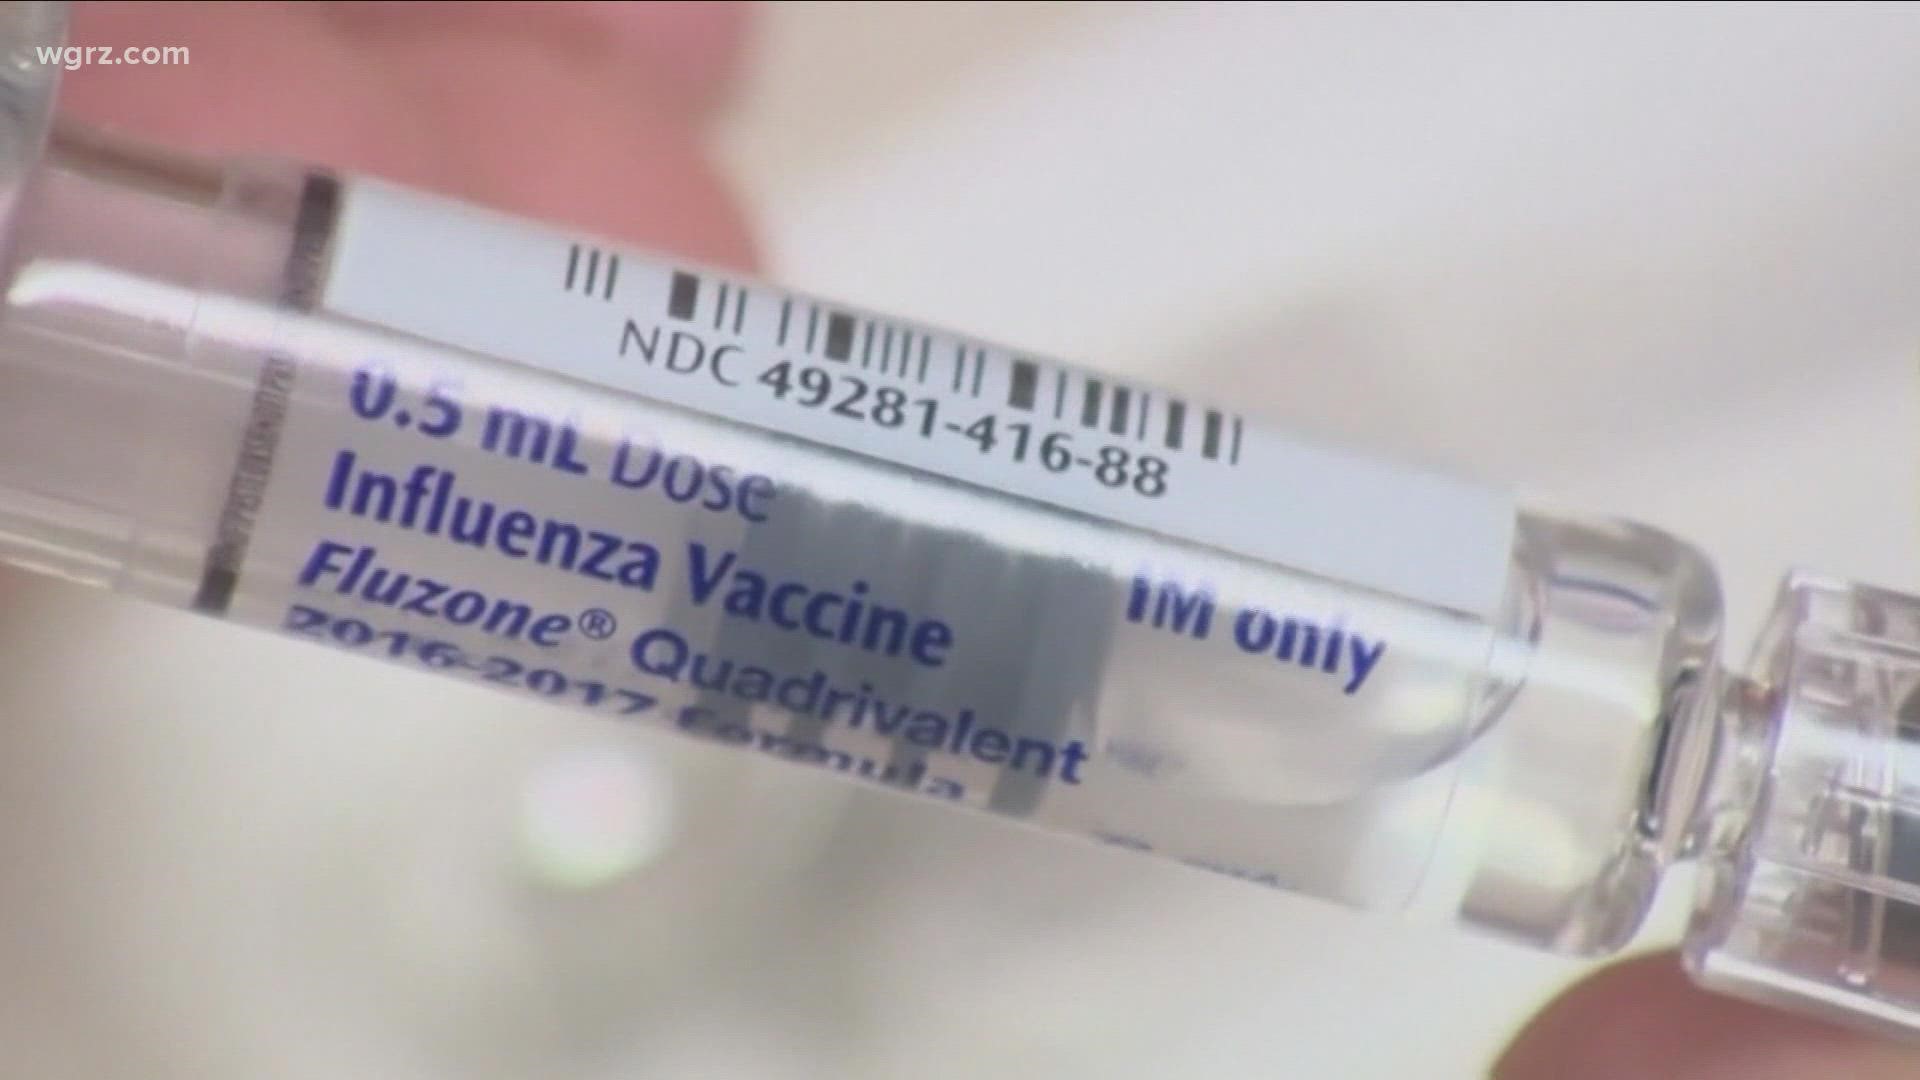 As the seasons start to change, doctors say they are focusing even more this autumn on encouraging you to get you annual flu shot.